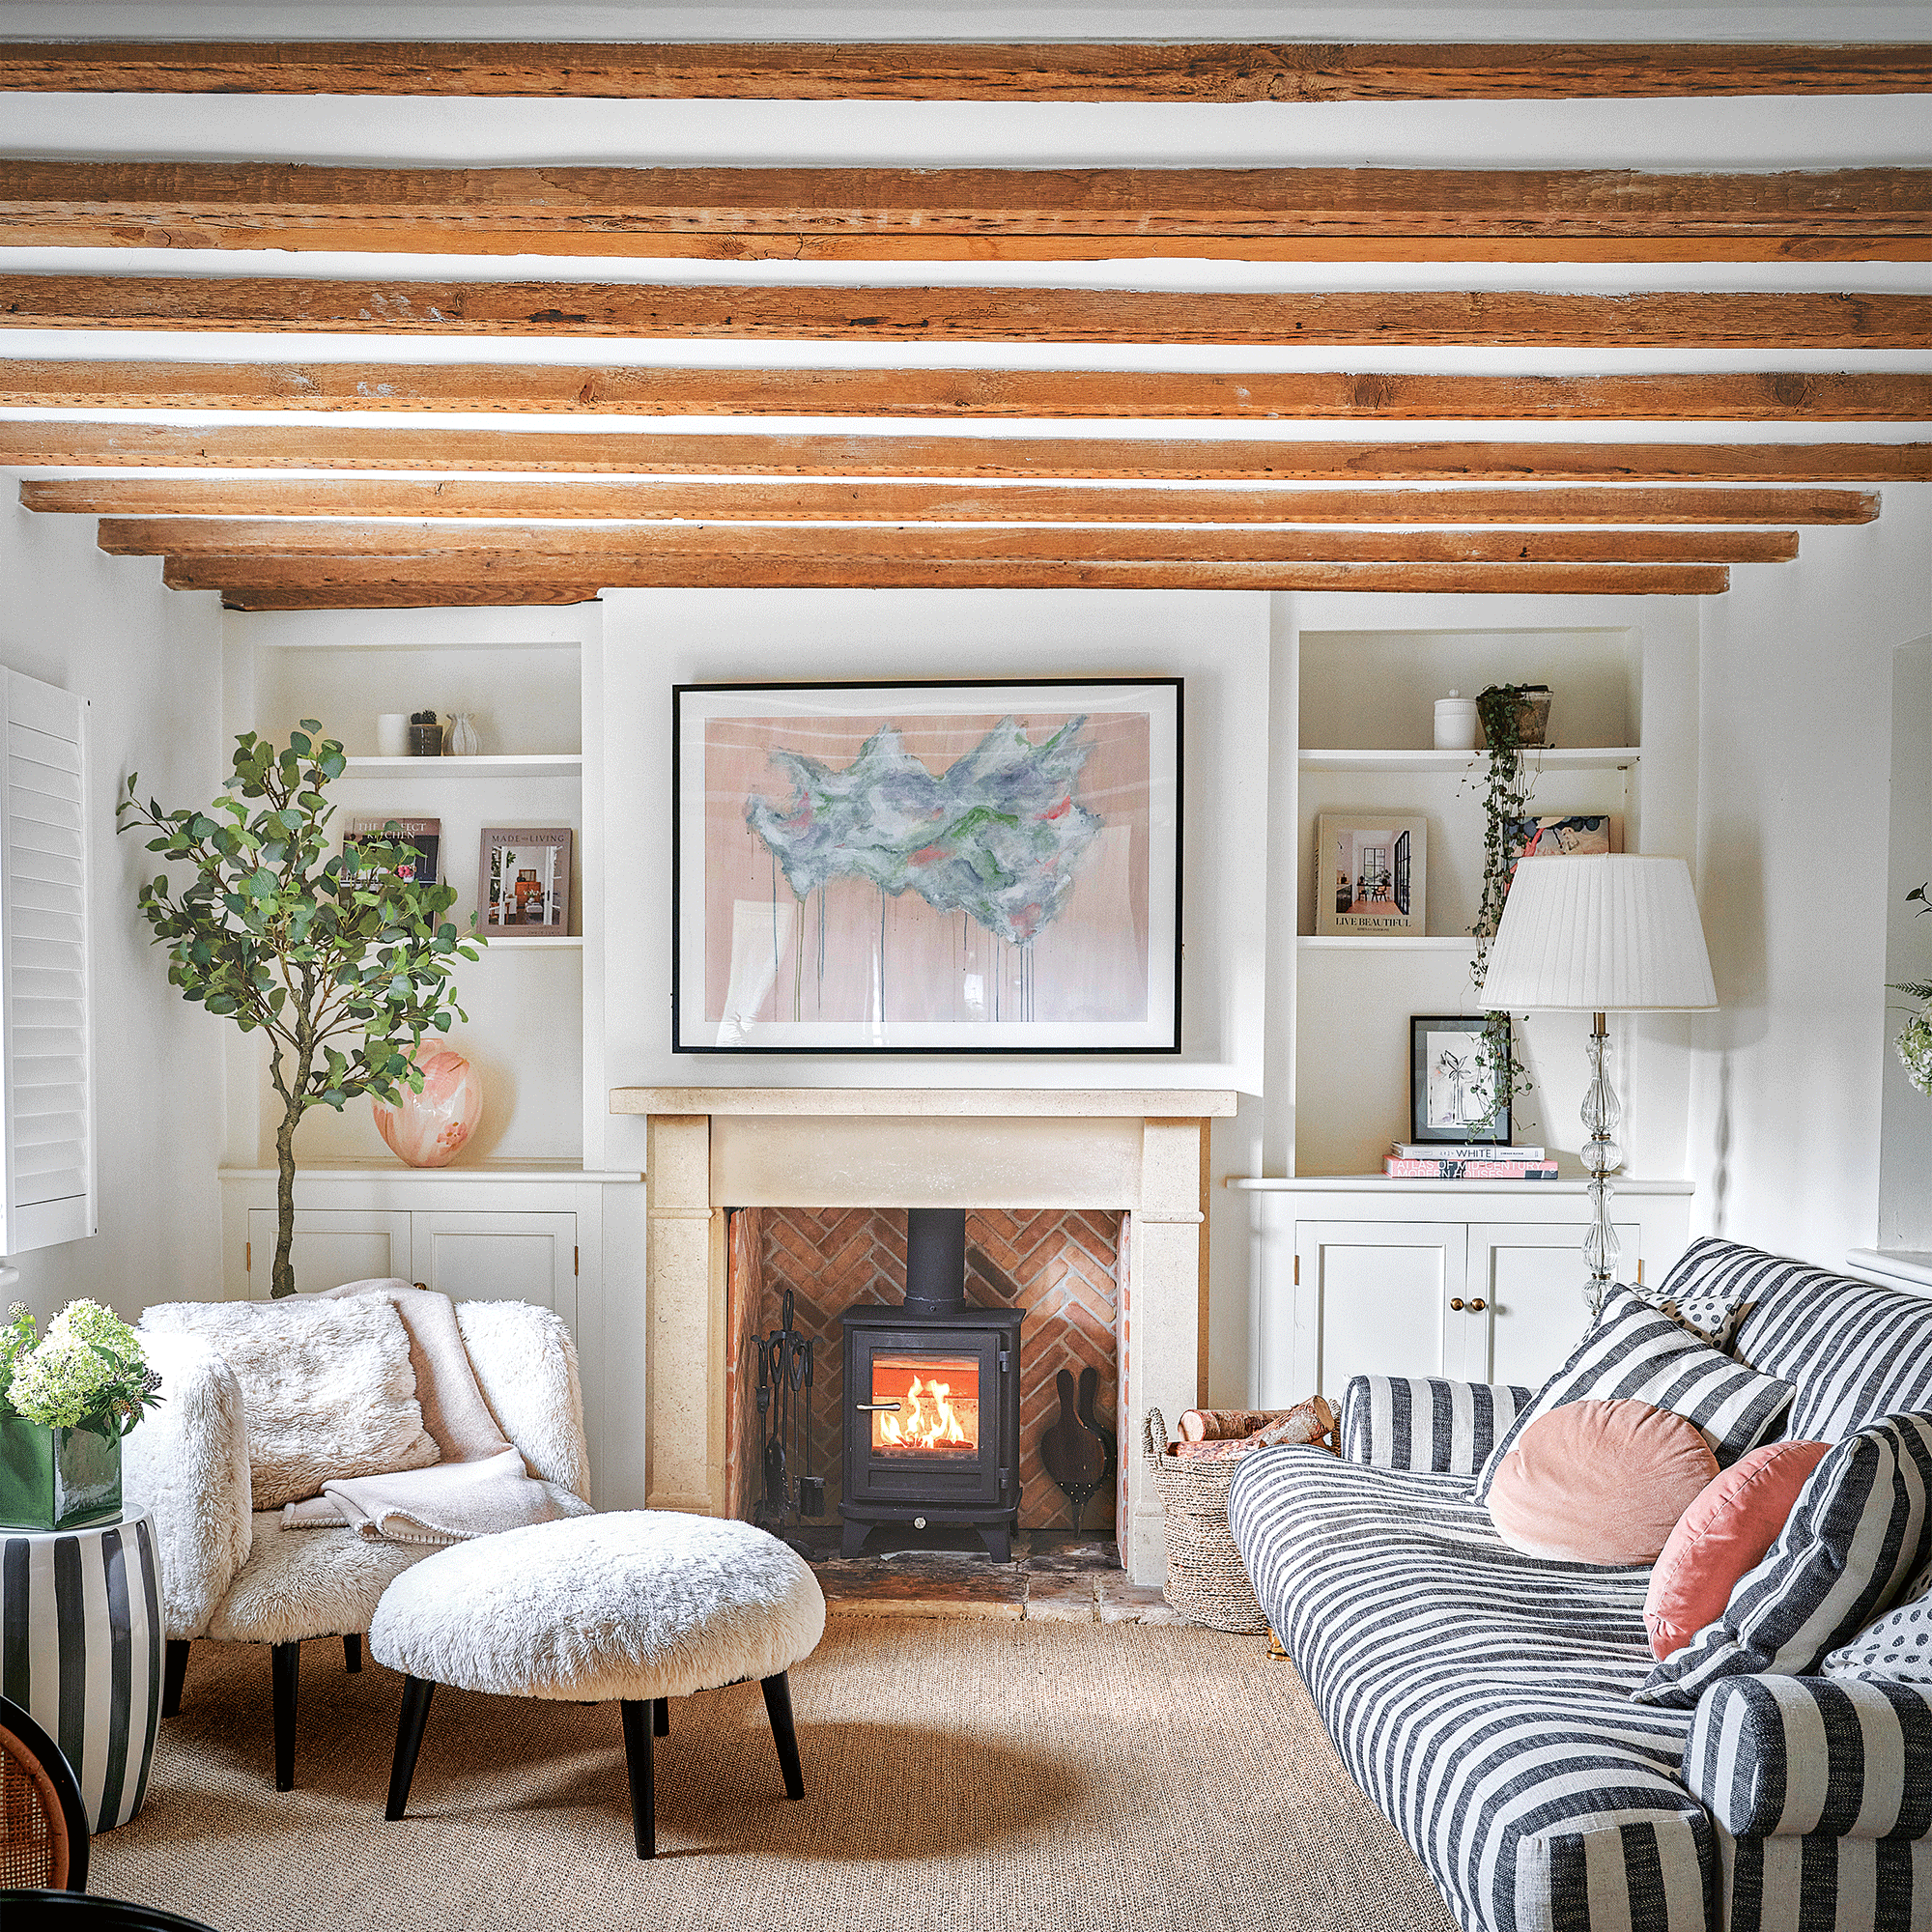 Living room ceiling ideas – perk up your 5th wall with our expert advice